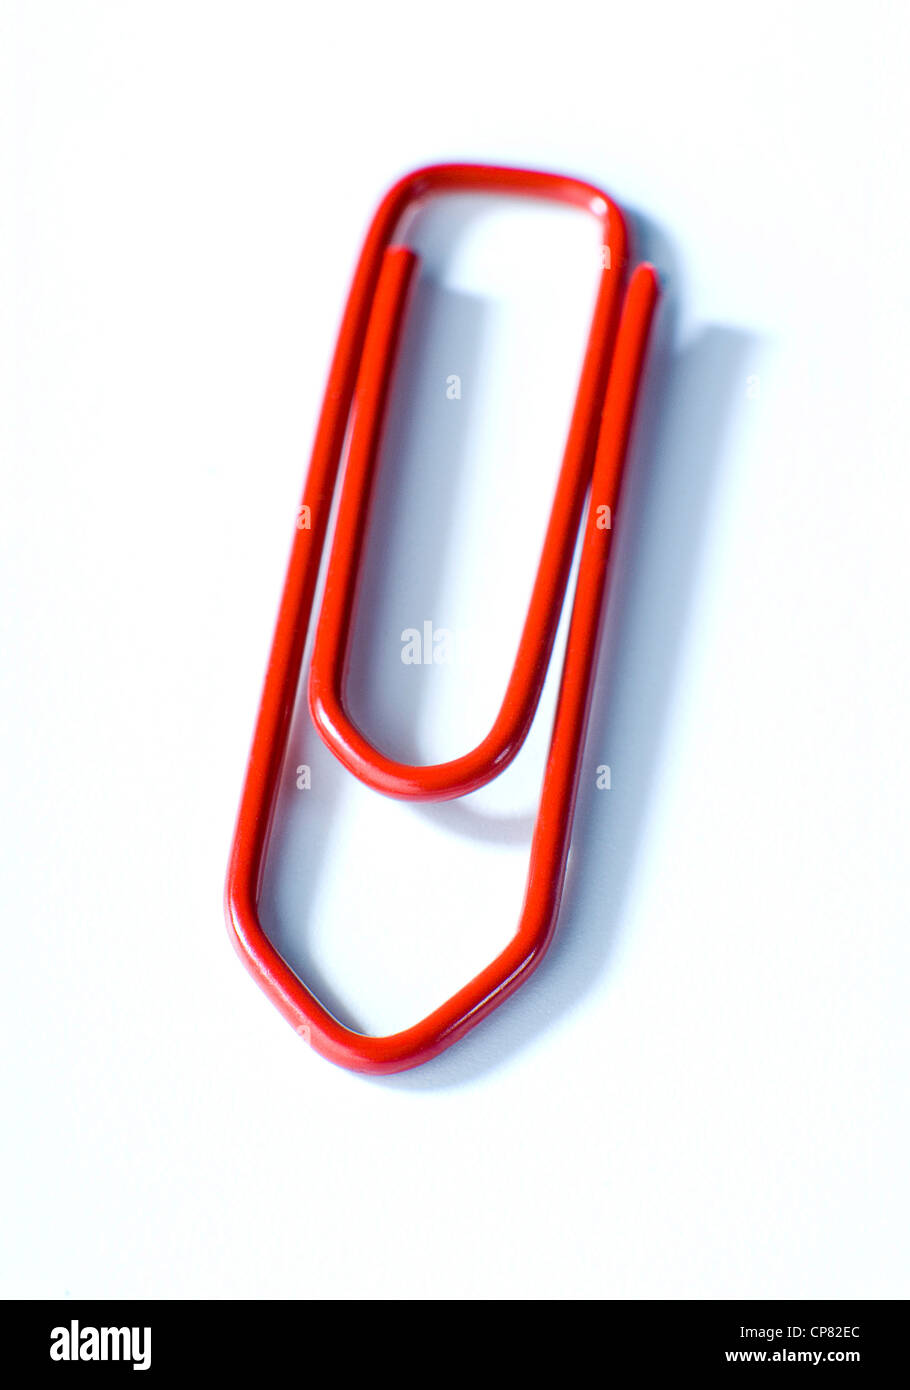 Cloe up of a red paper clip on white background. Stock Photo